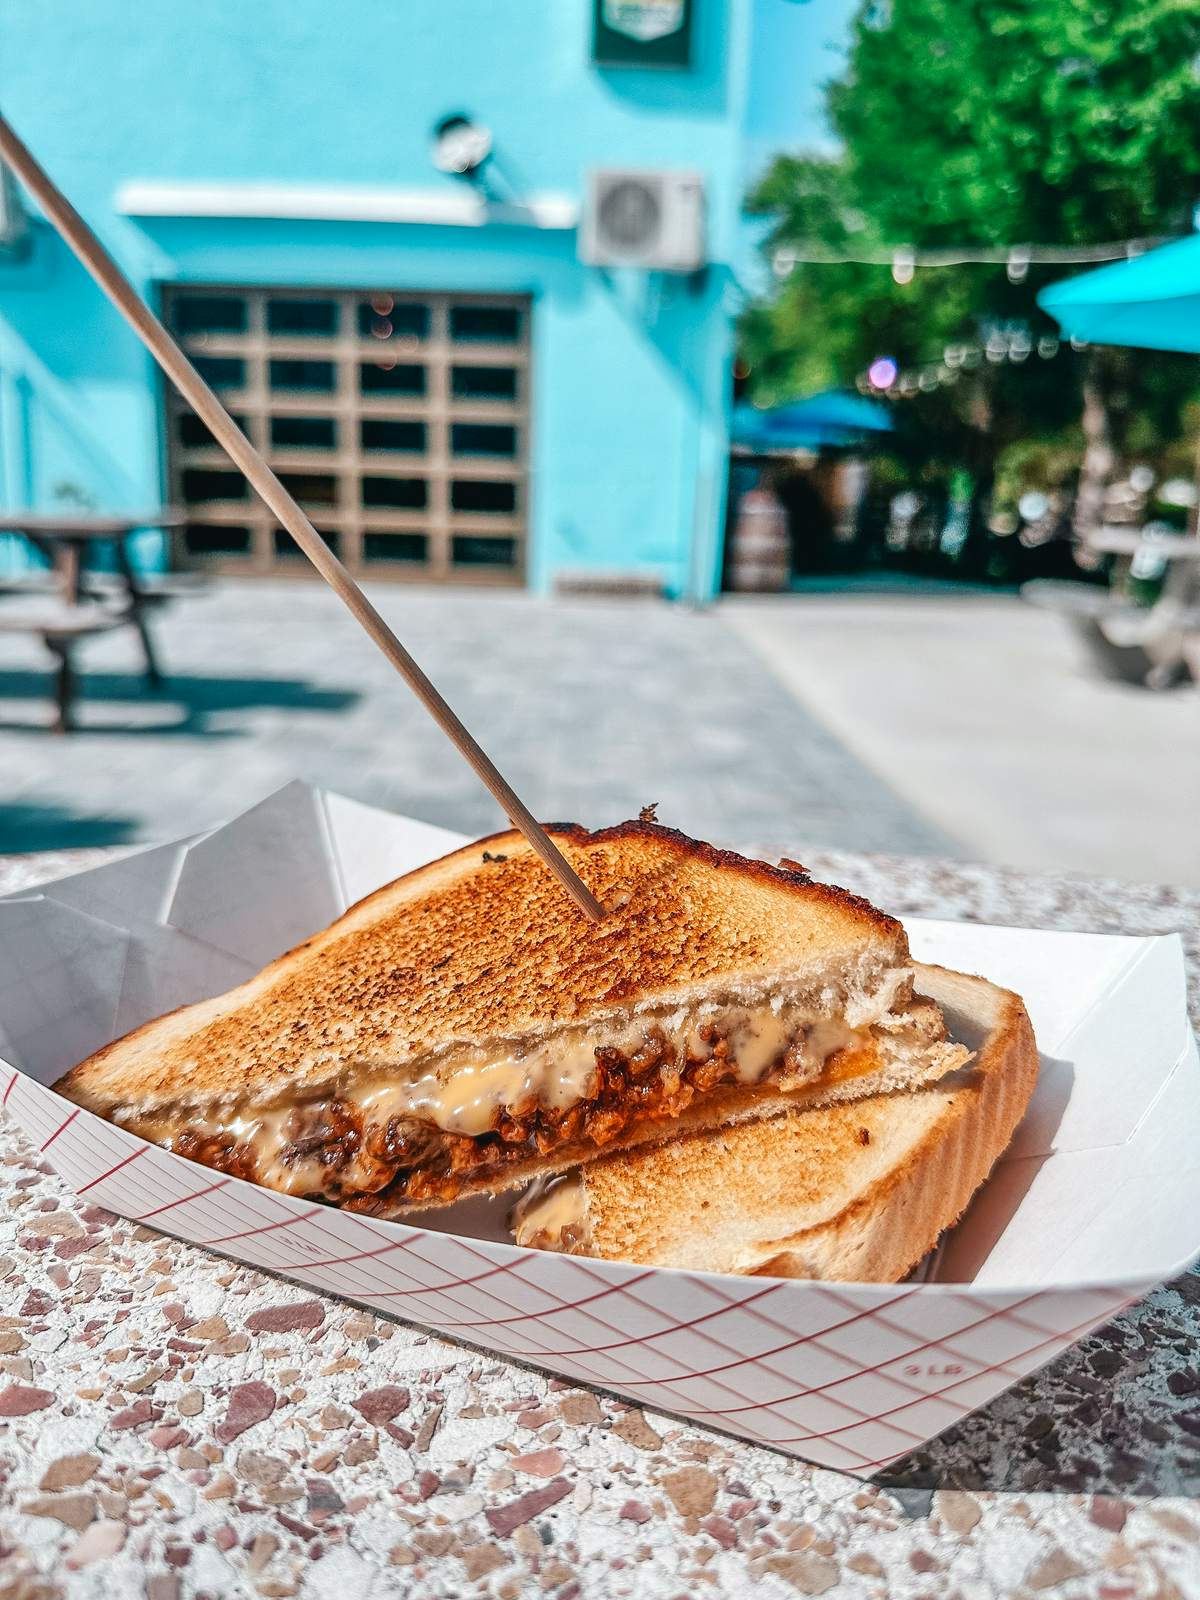 Grilled cheese sloppy joe from Cotherman Distilling in Dunedin Florida